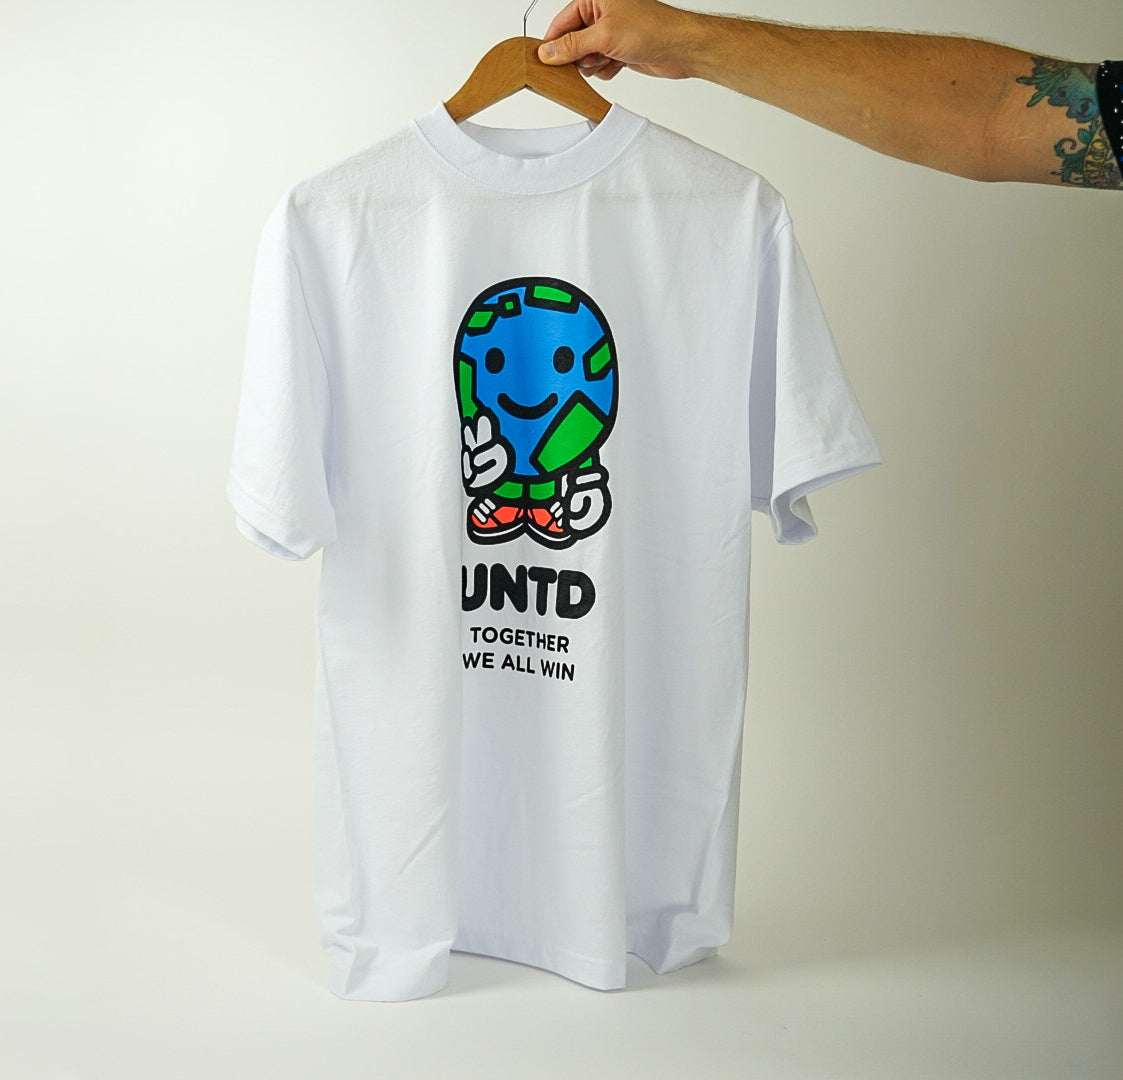 Terry UNTD Together We All Win Tee - UNTD